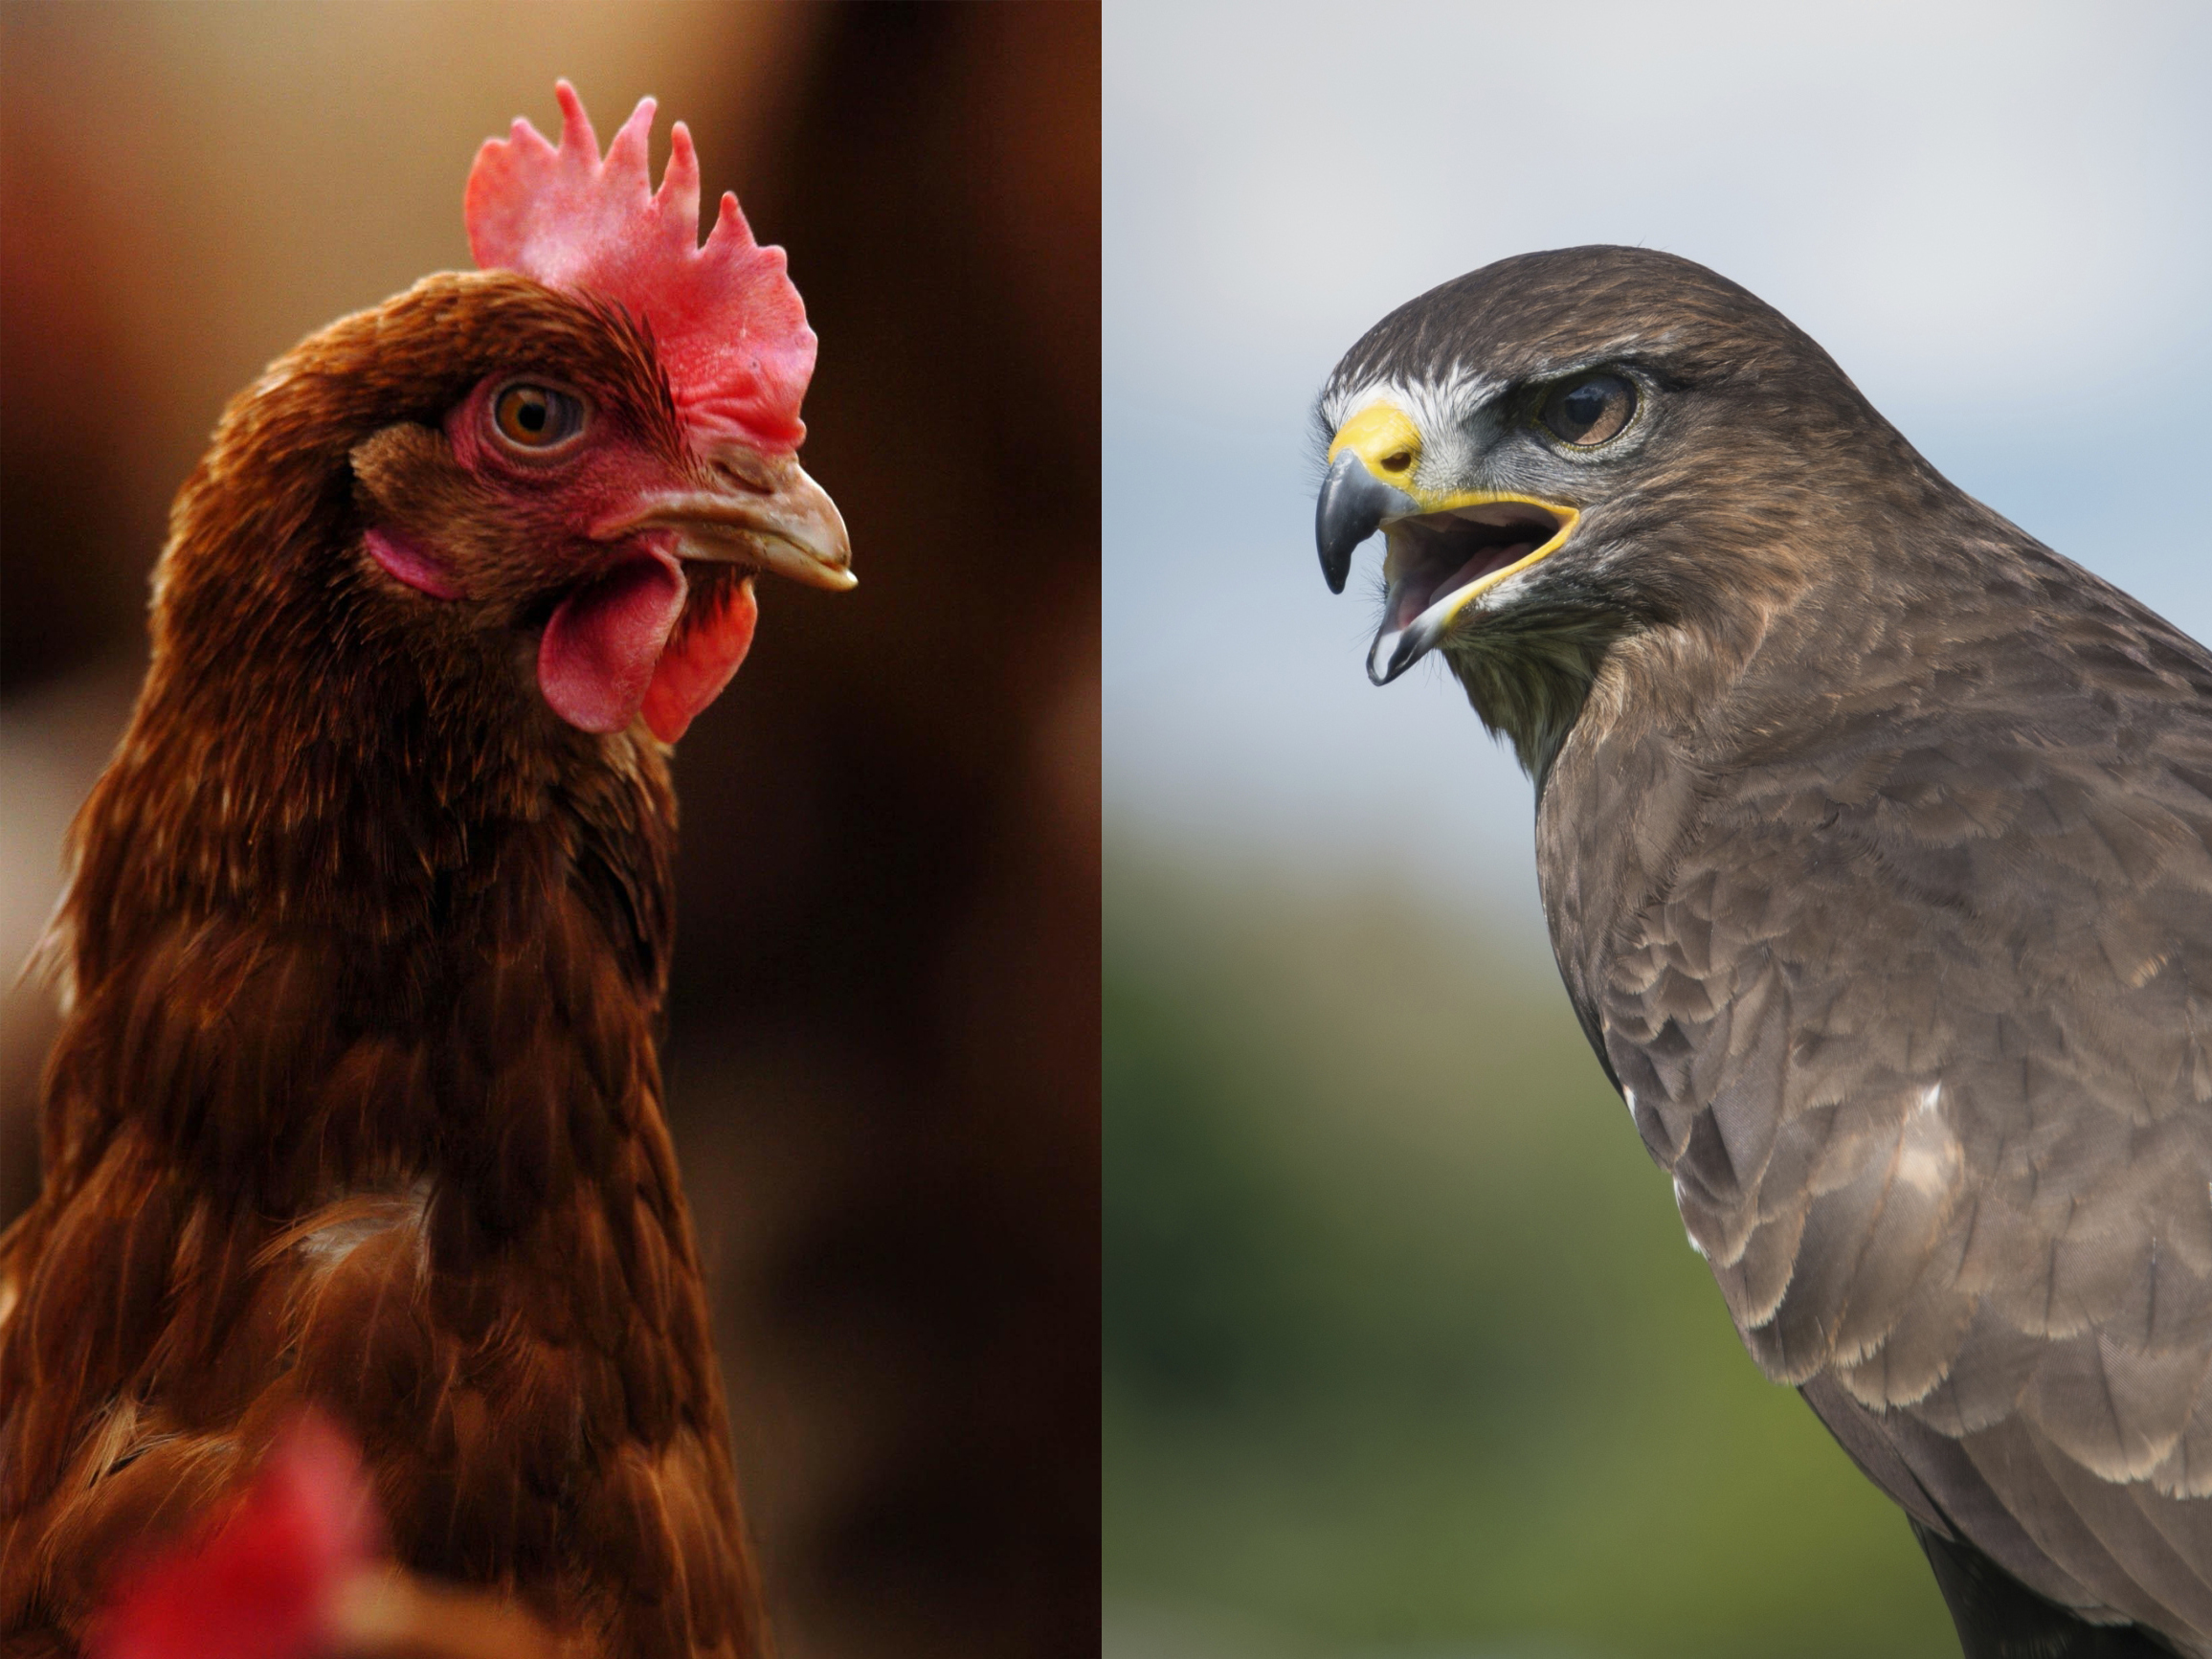 Police mistook the chicken carcasses for buzzards